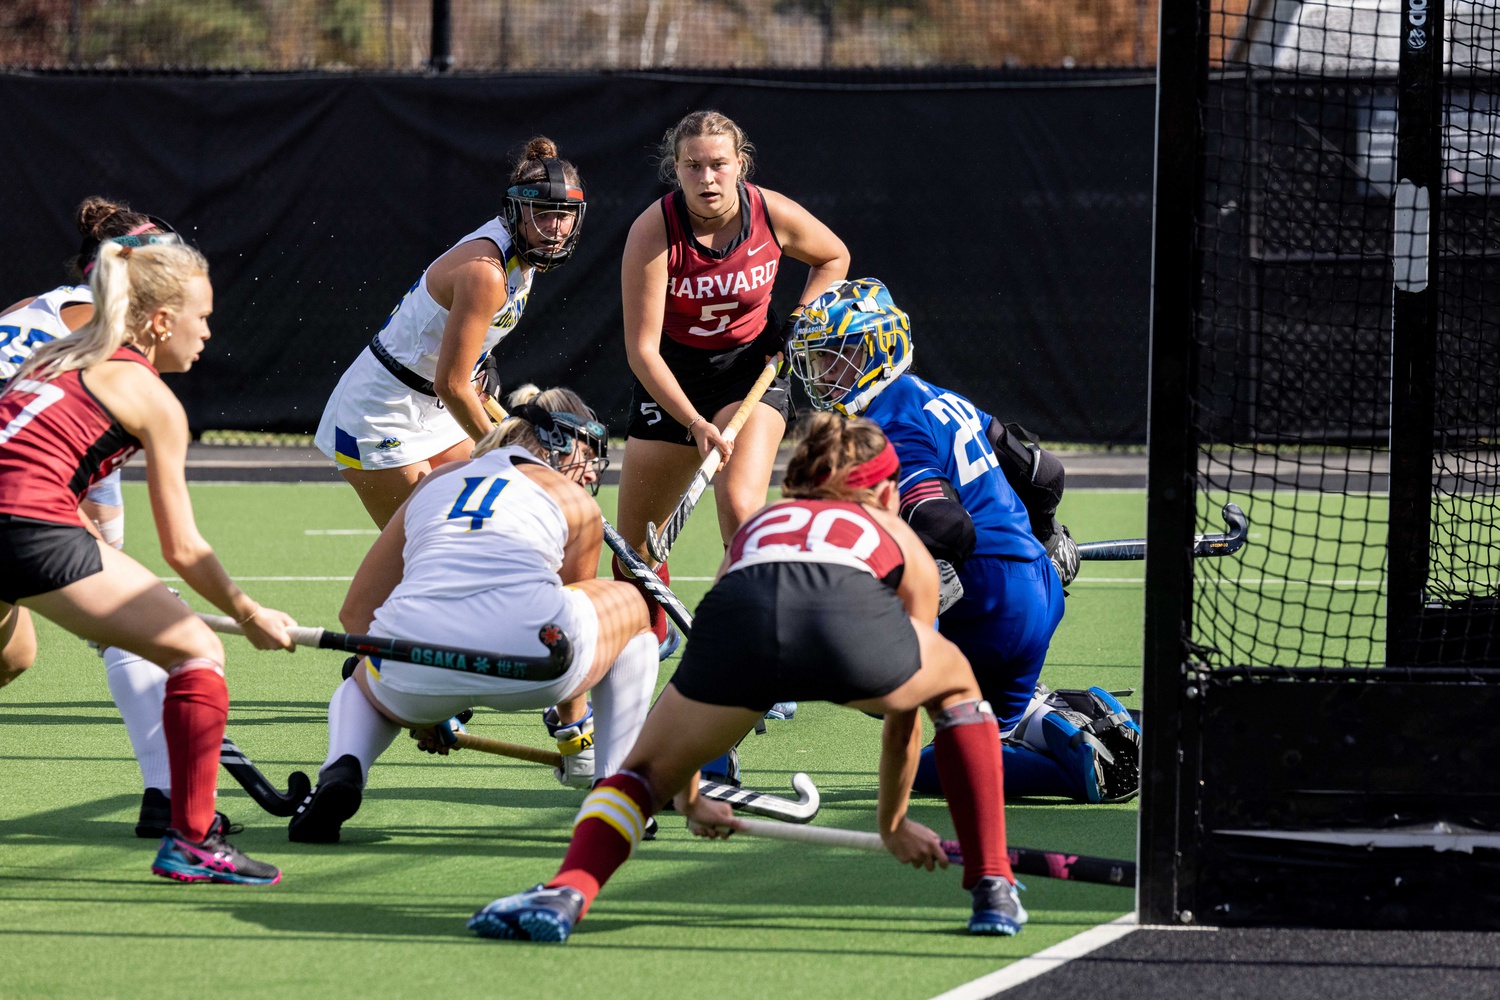 The Harvard offense swarms the net at home against Delaware on October 16, 2022.